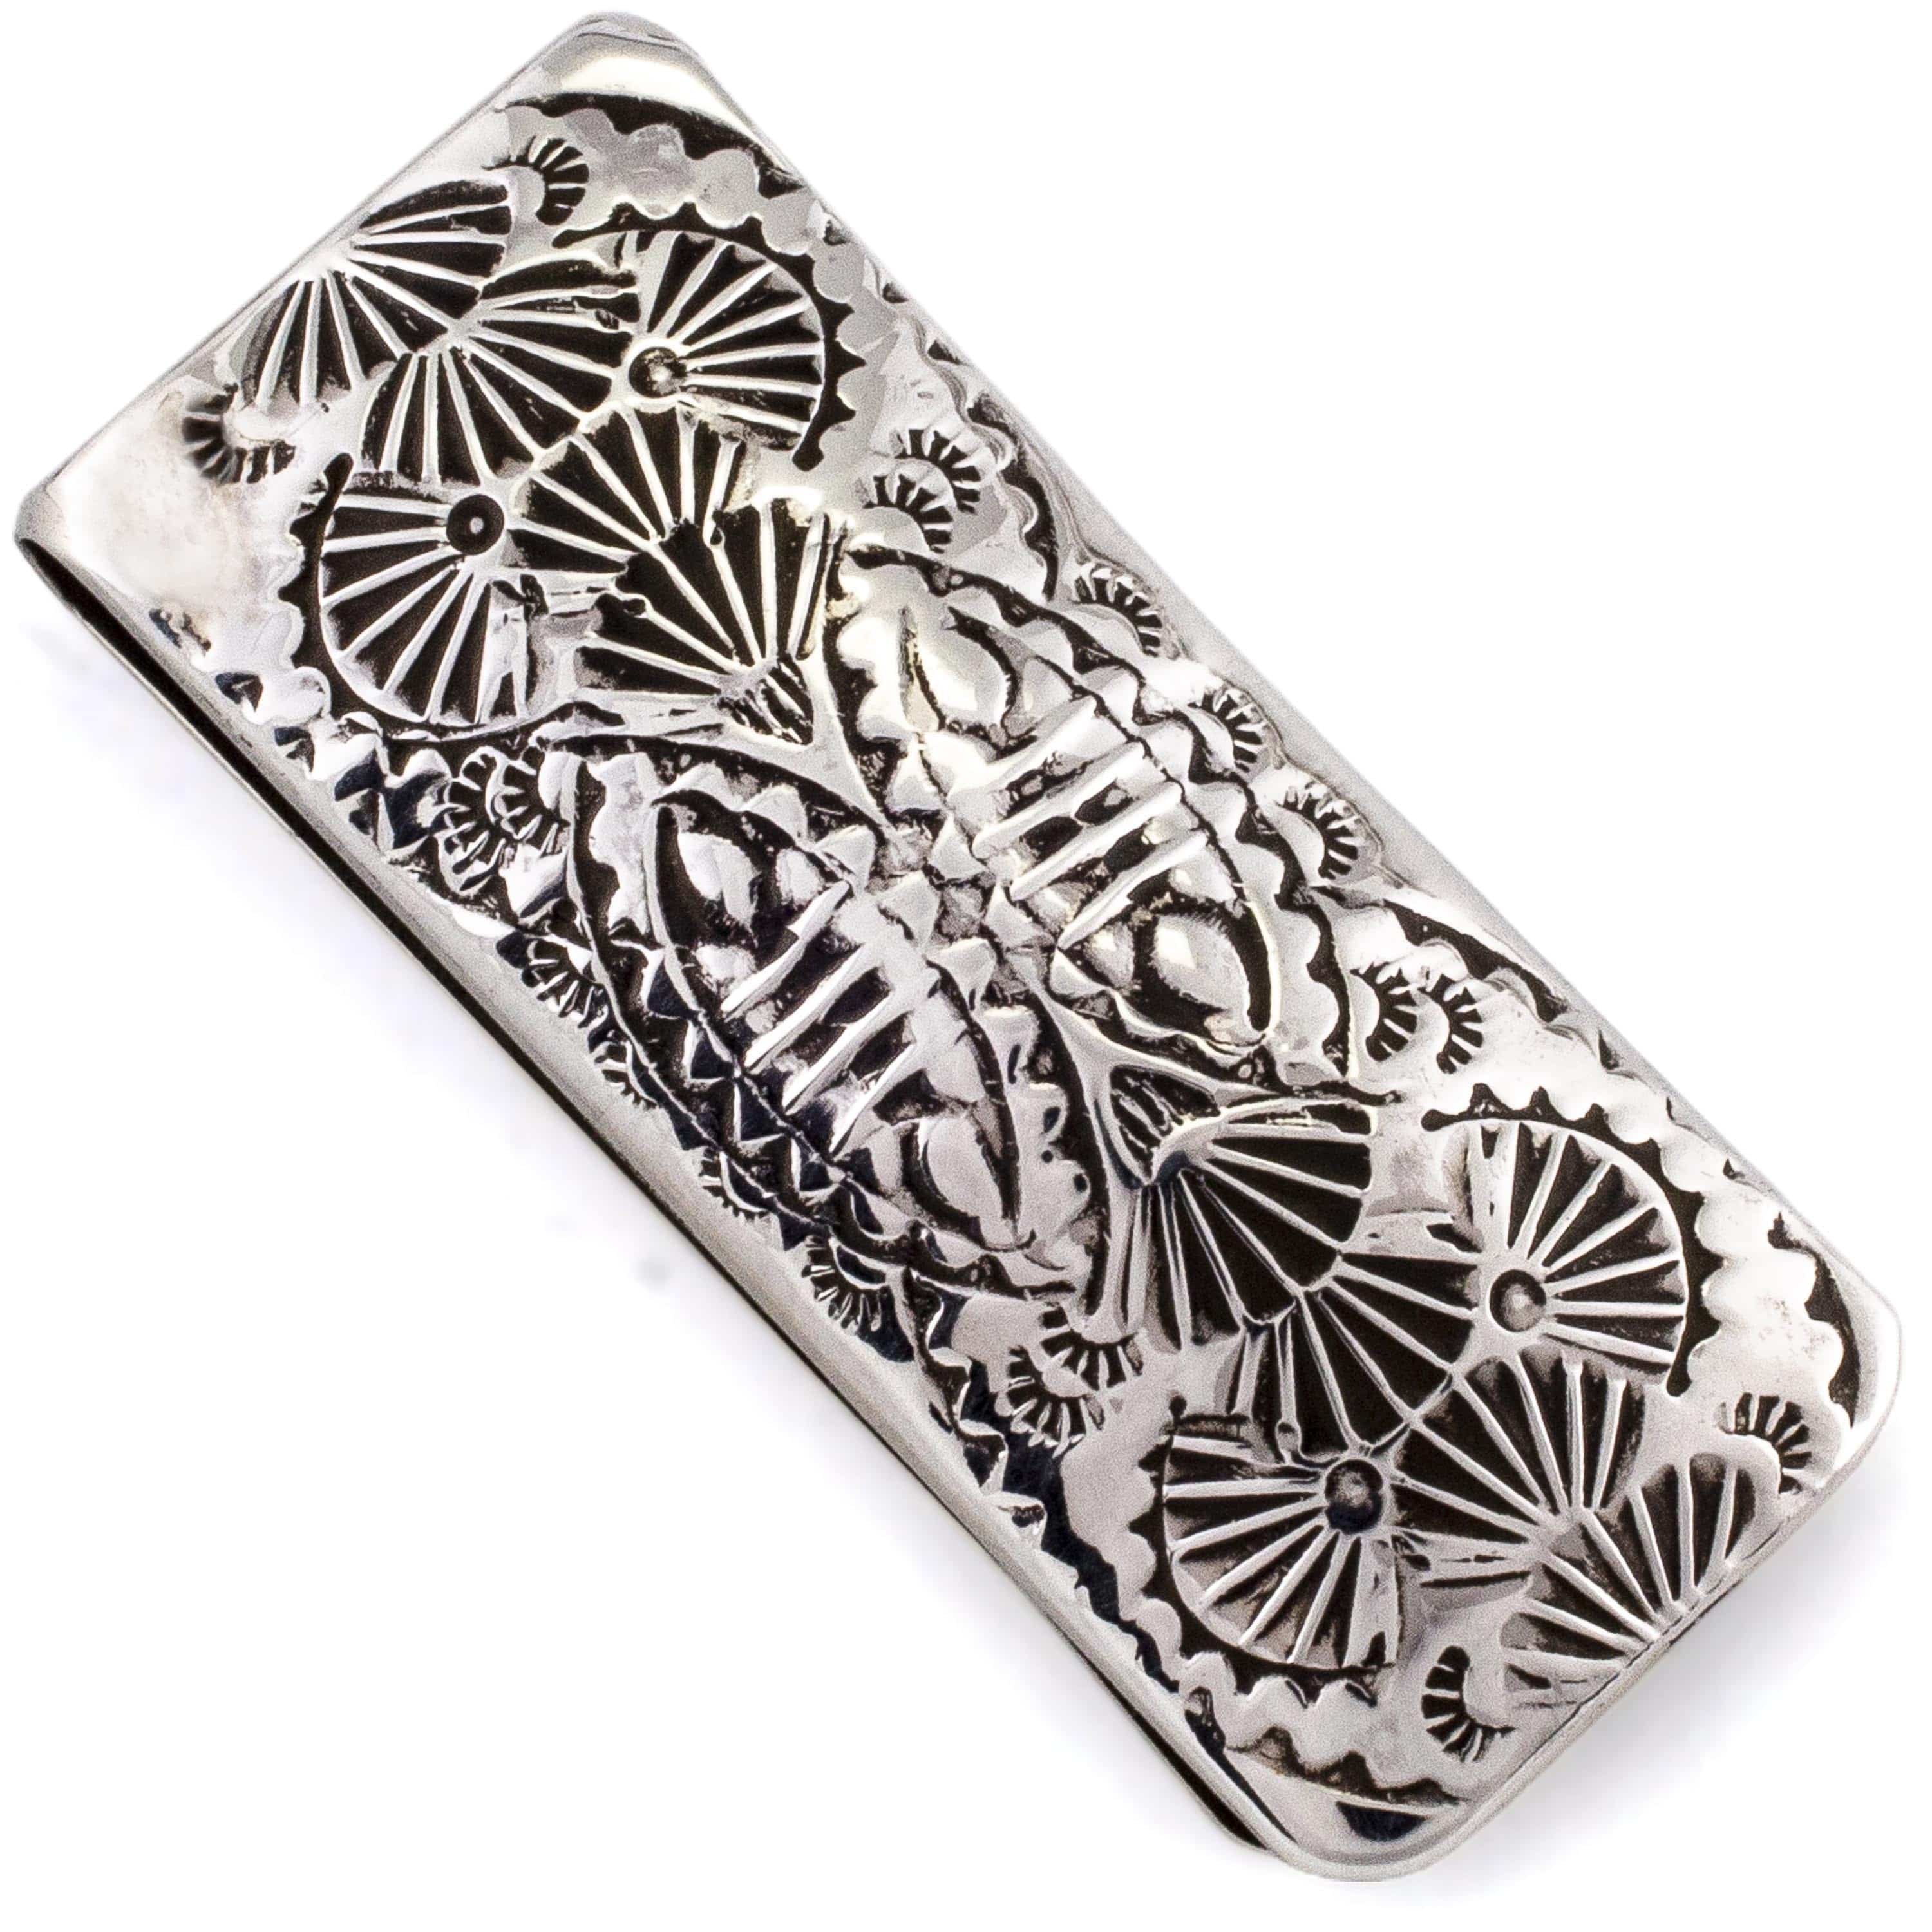 Kalifano Native American Jewelry Shirley Skeets Navajo USA Native American Made 925 Sterling Silver Money Clip NAM160.001